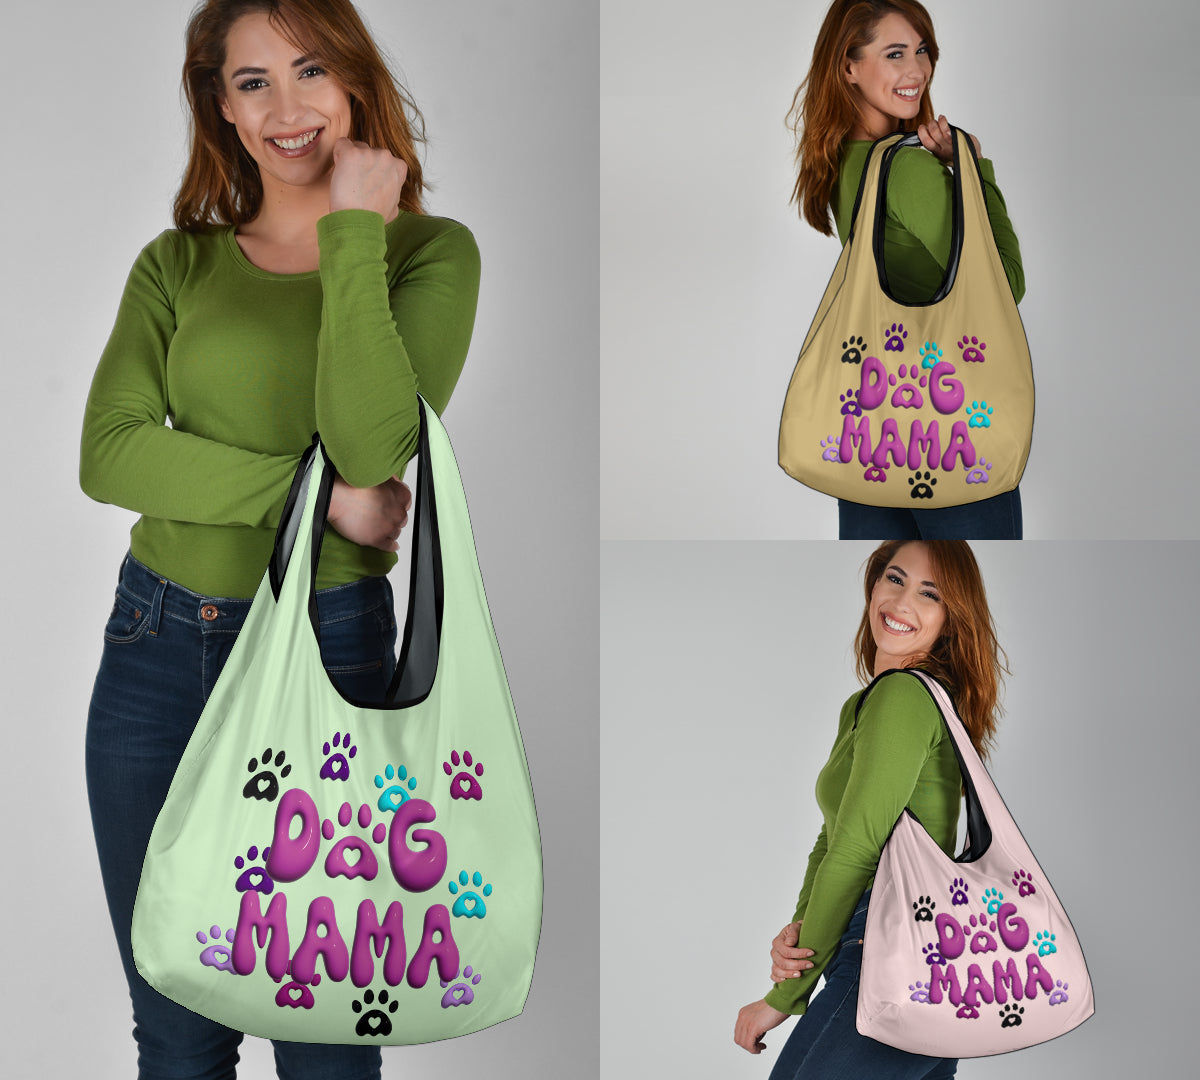 Dog Mama Puffy Inflated Design 3 Pack Grocery Bags - Mom and Dad Collection